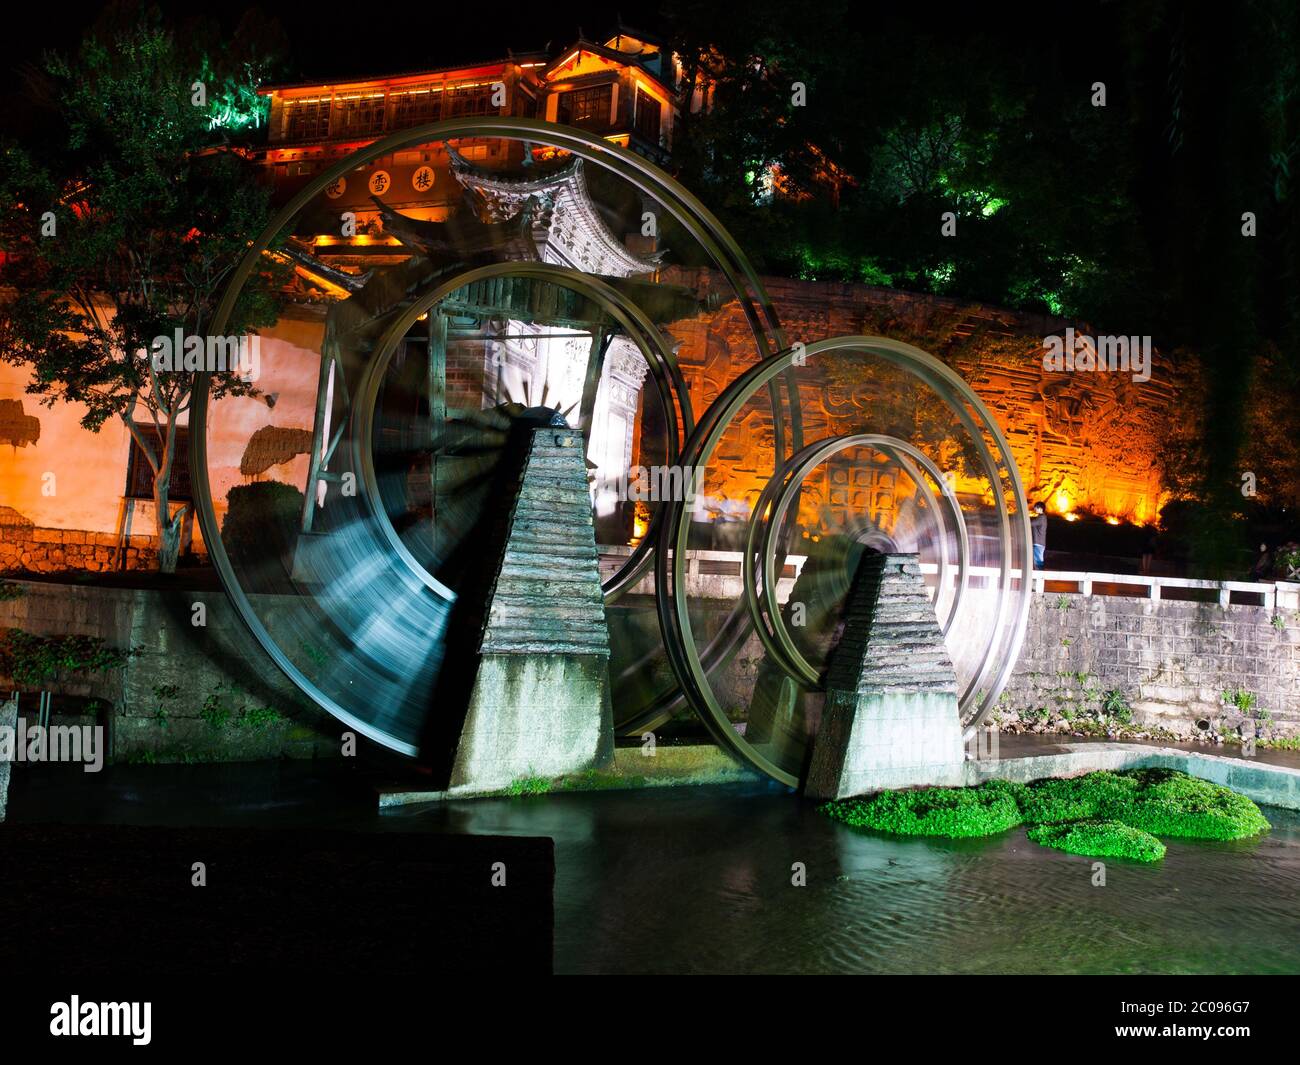 Vintage watermill wheel in Lijiang Old Town by night, Yunnan, China Stock Photo